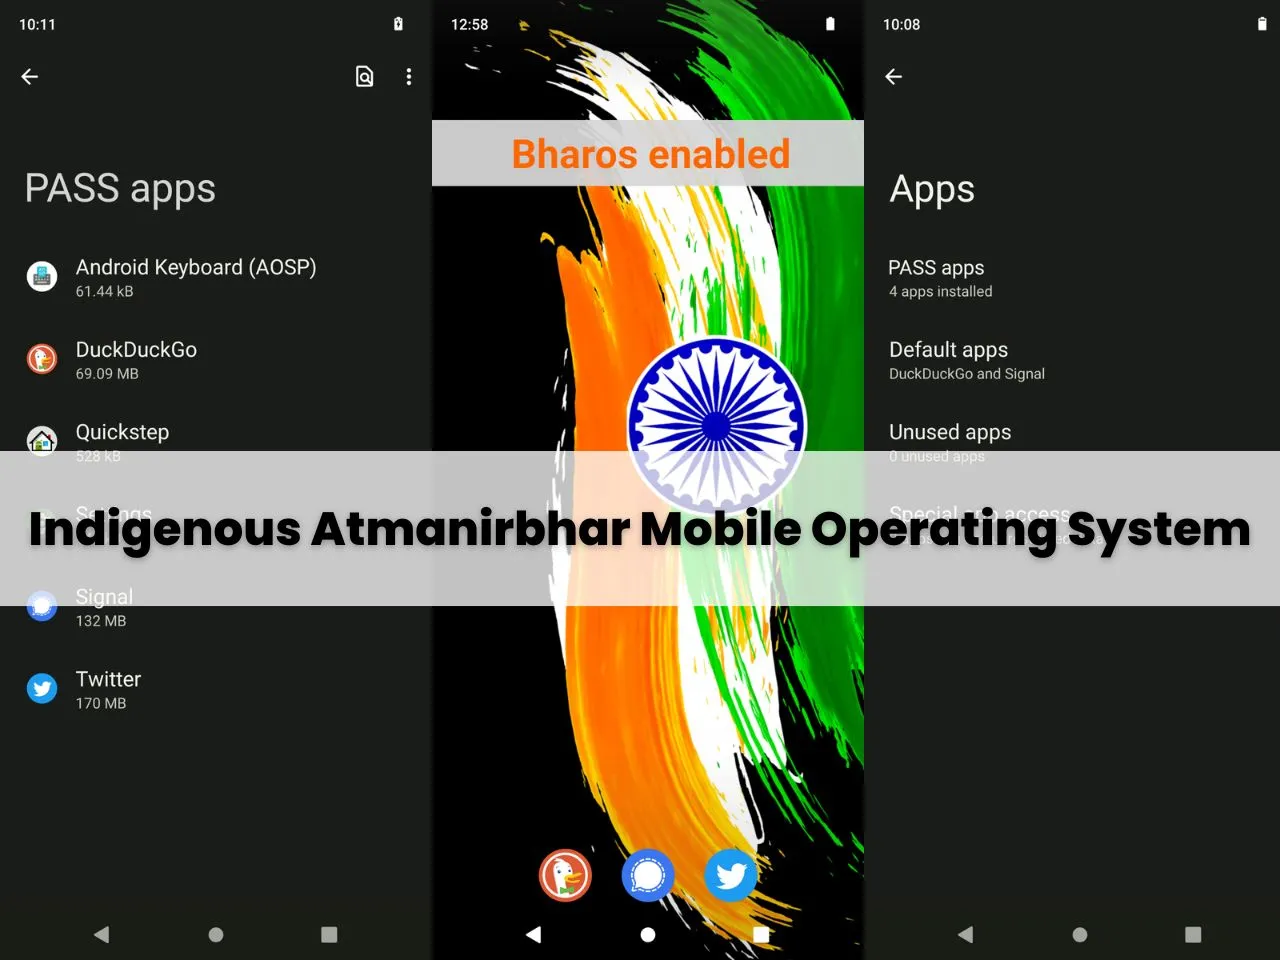 IIT Madras-incubated Firm develops Indigenous Atmanirbhar Mobile Operating System